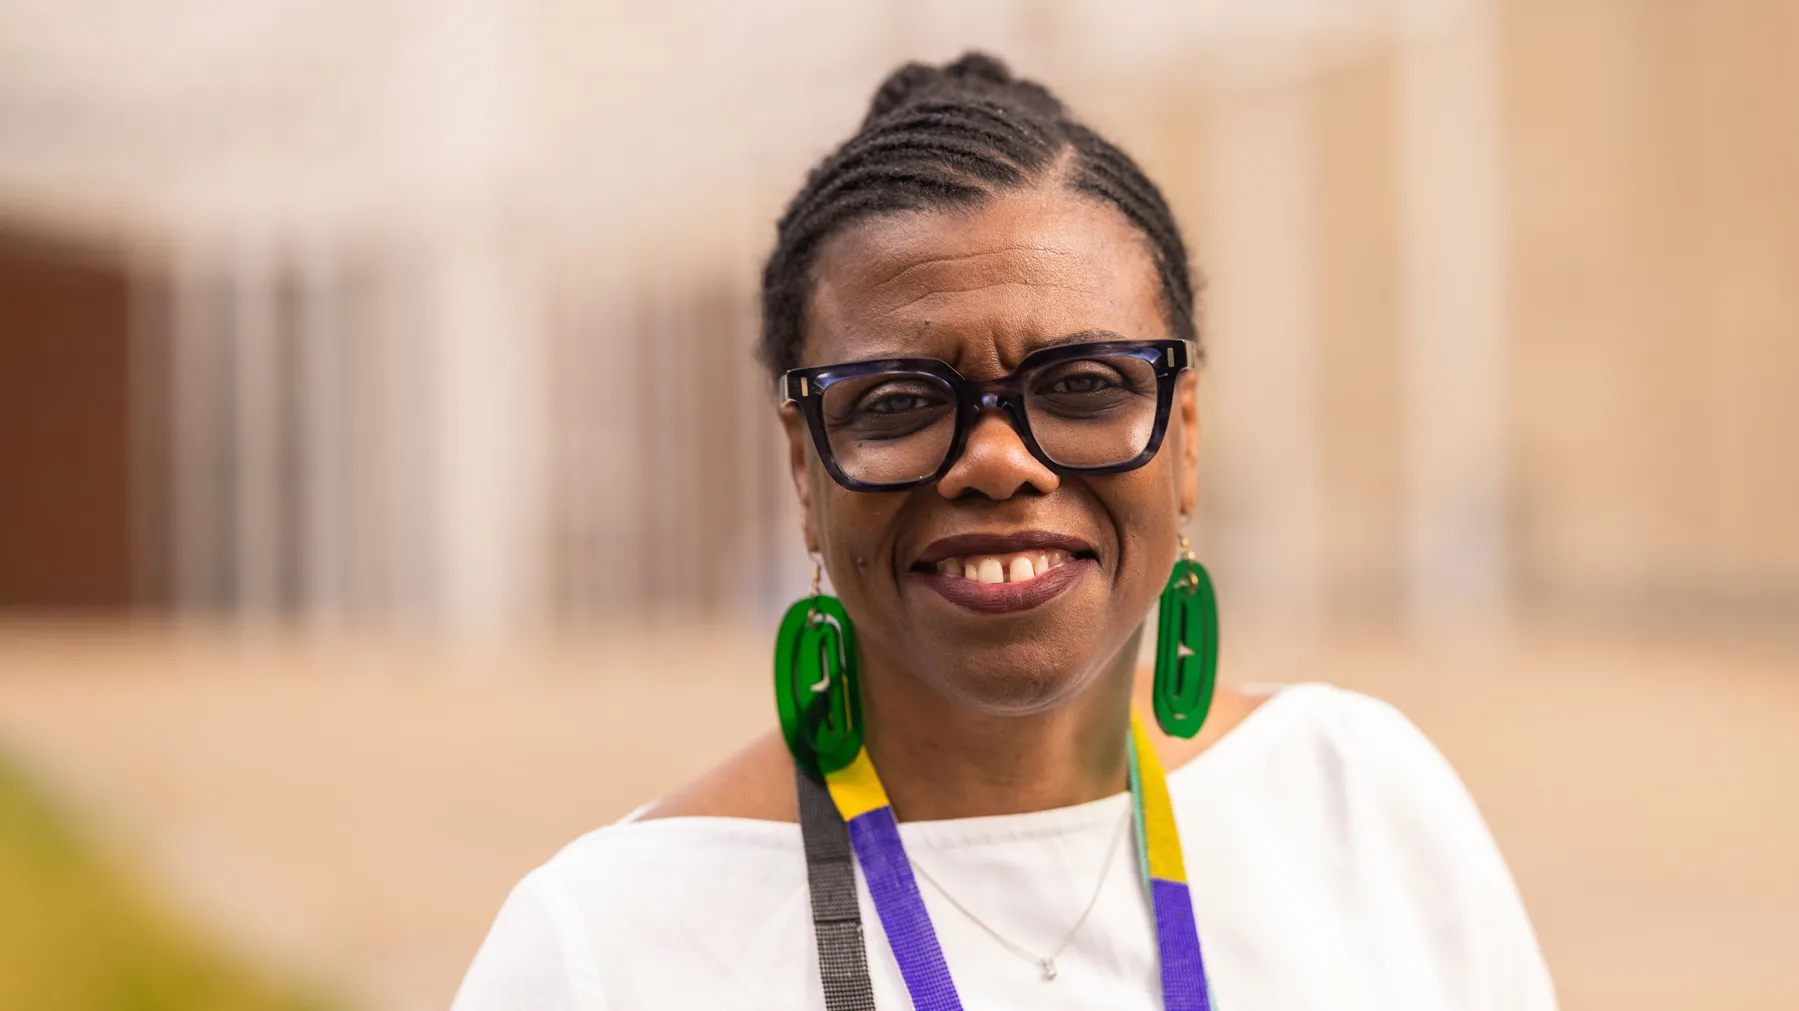 Gaëtane Verna, a Black woman with her braided hair pulled back in a bun, is shown from the shoulders up, smiling as she seems to make eye contact with the viewer outside of the Wexner Center for the Arts. She wears thick-rimmed glasses and big transparent earrings, adding to her confident, artsy presence.